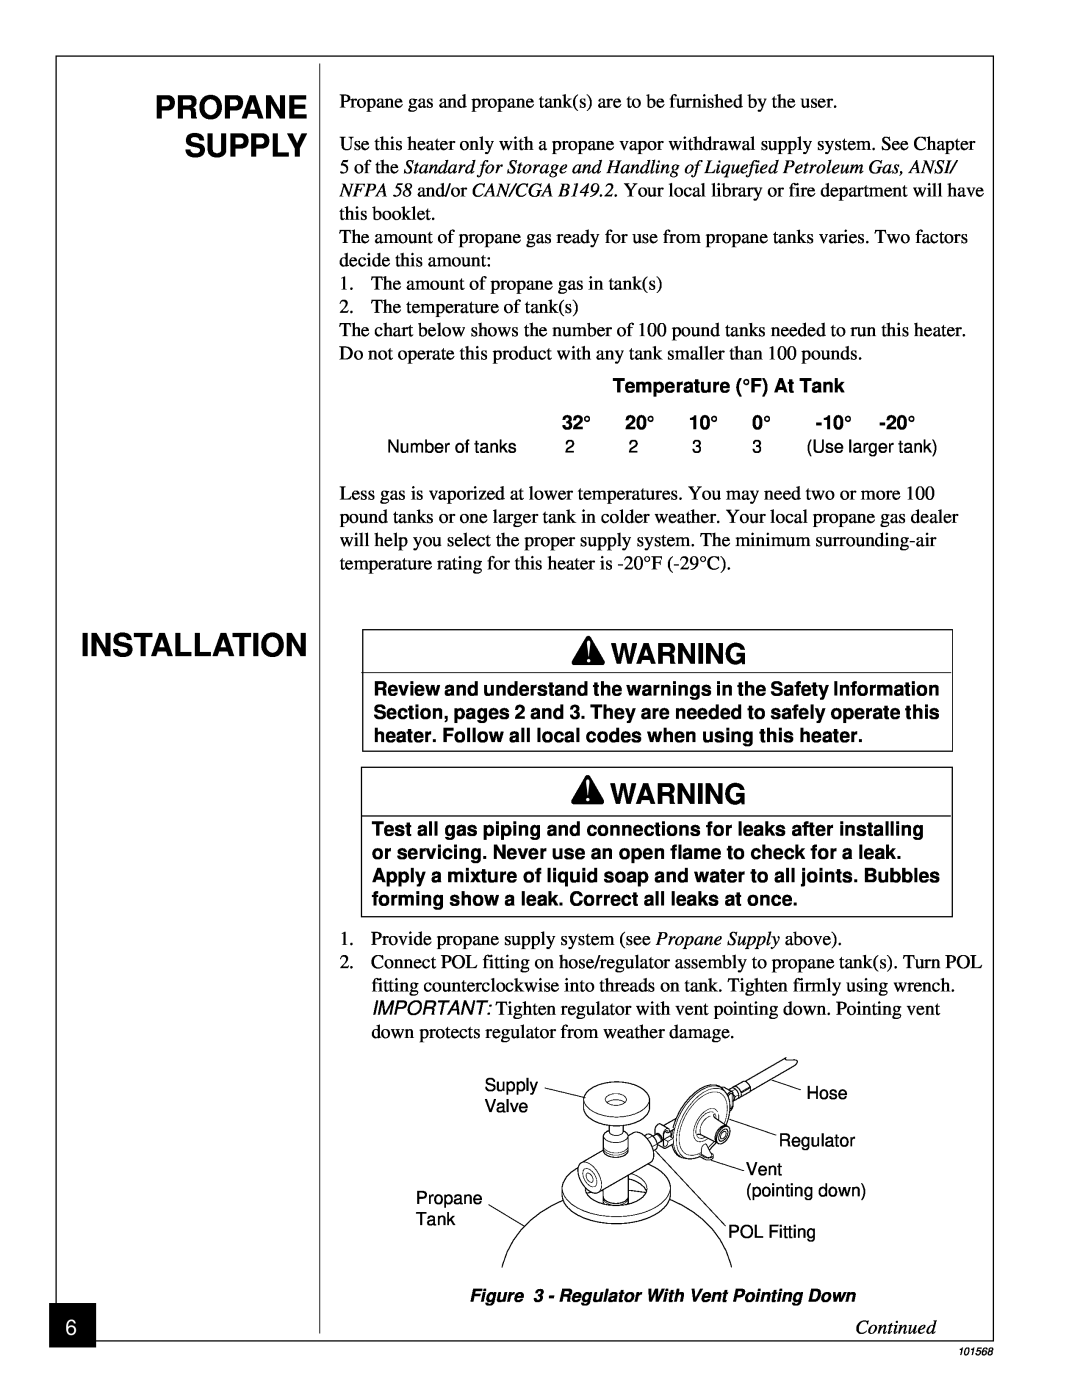 Homelite UT65052-A, HP155A owner manual Propane Supply Installation, Temperature F At Tank, Continued 